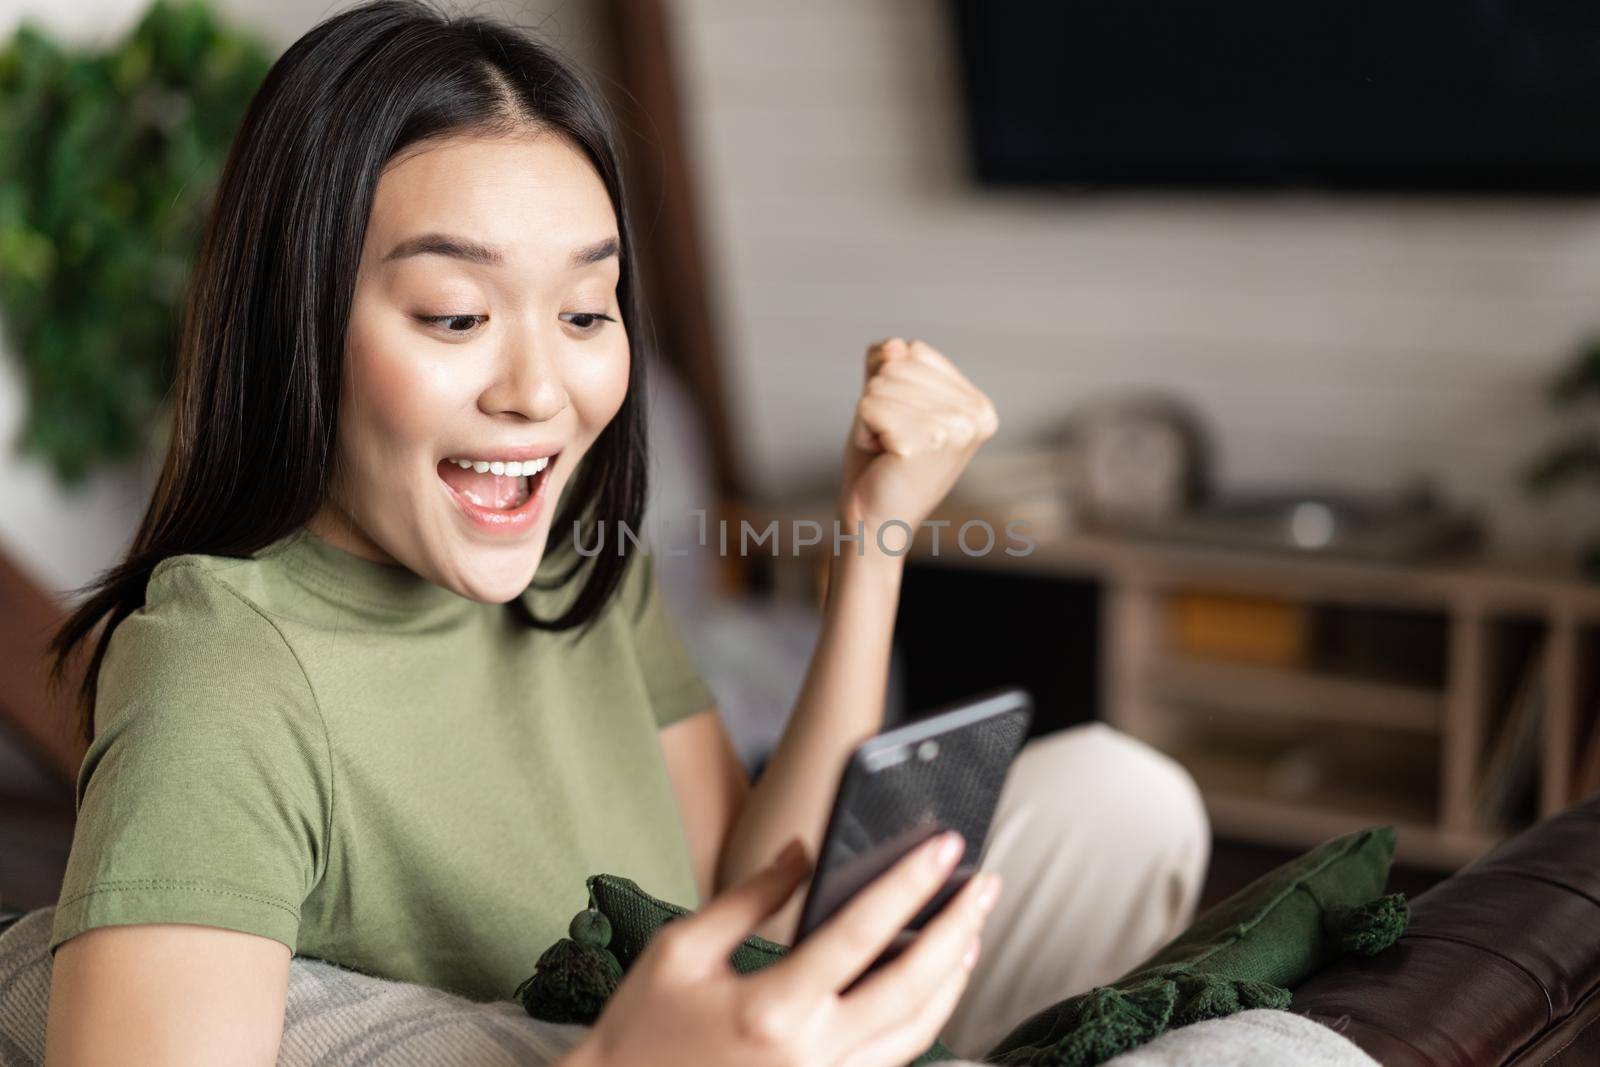 Smiling asian woman looking satisfied, making fist pump and reading mobile phone, sitting at home and triumphing.